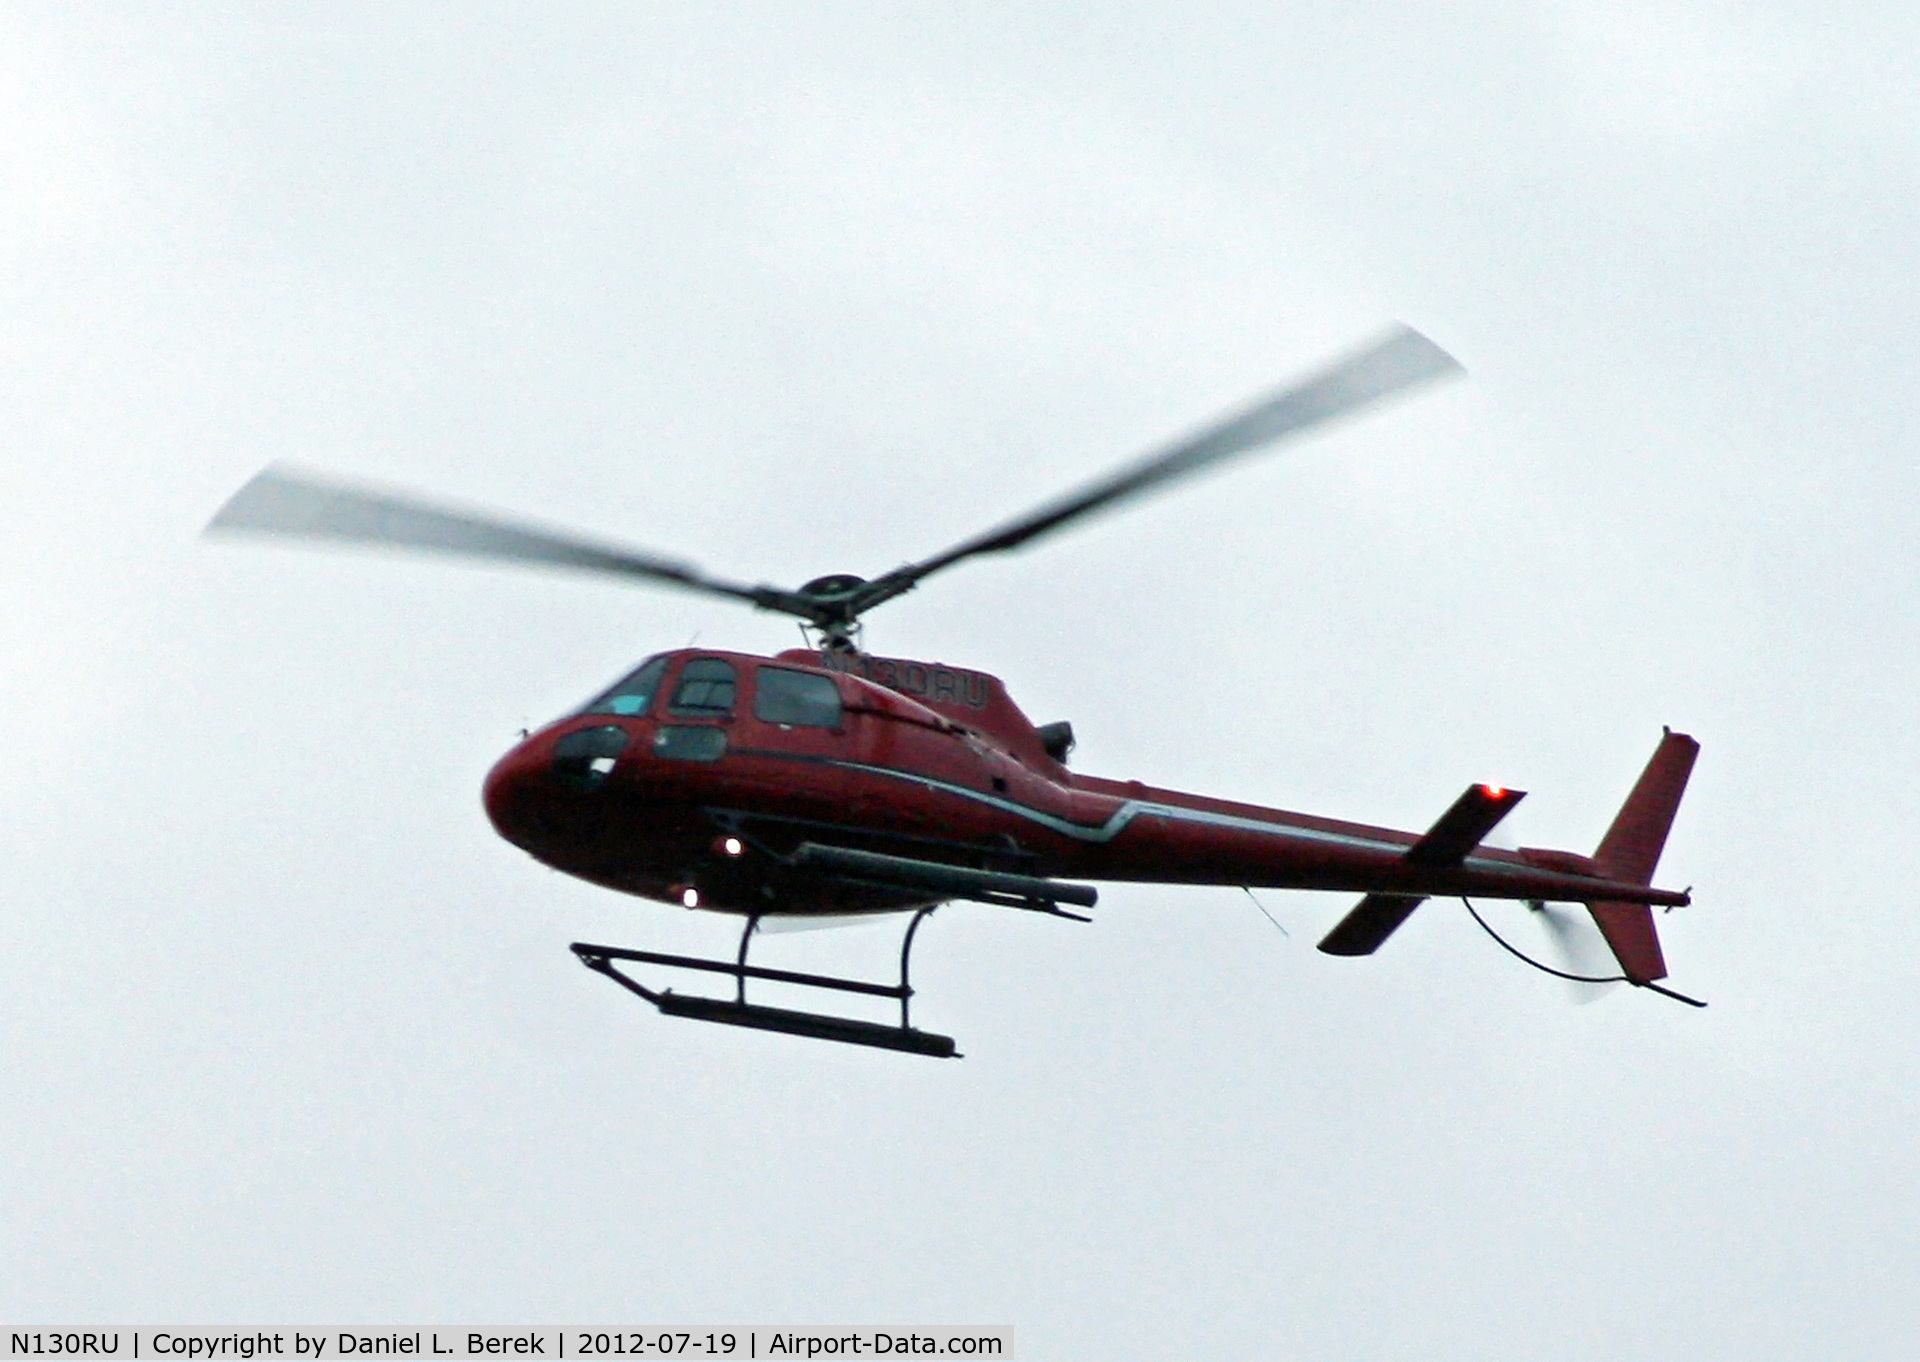 N130RU, 2007 Eurocopter AS-350B-2 Ecureuil C/N 4208, This red beauty was overflying the harbor area of Staten Island on a late summer evening.